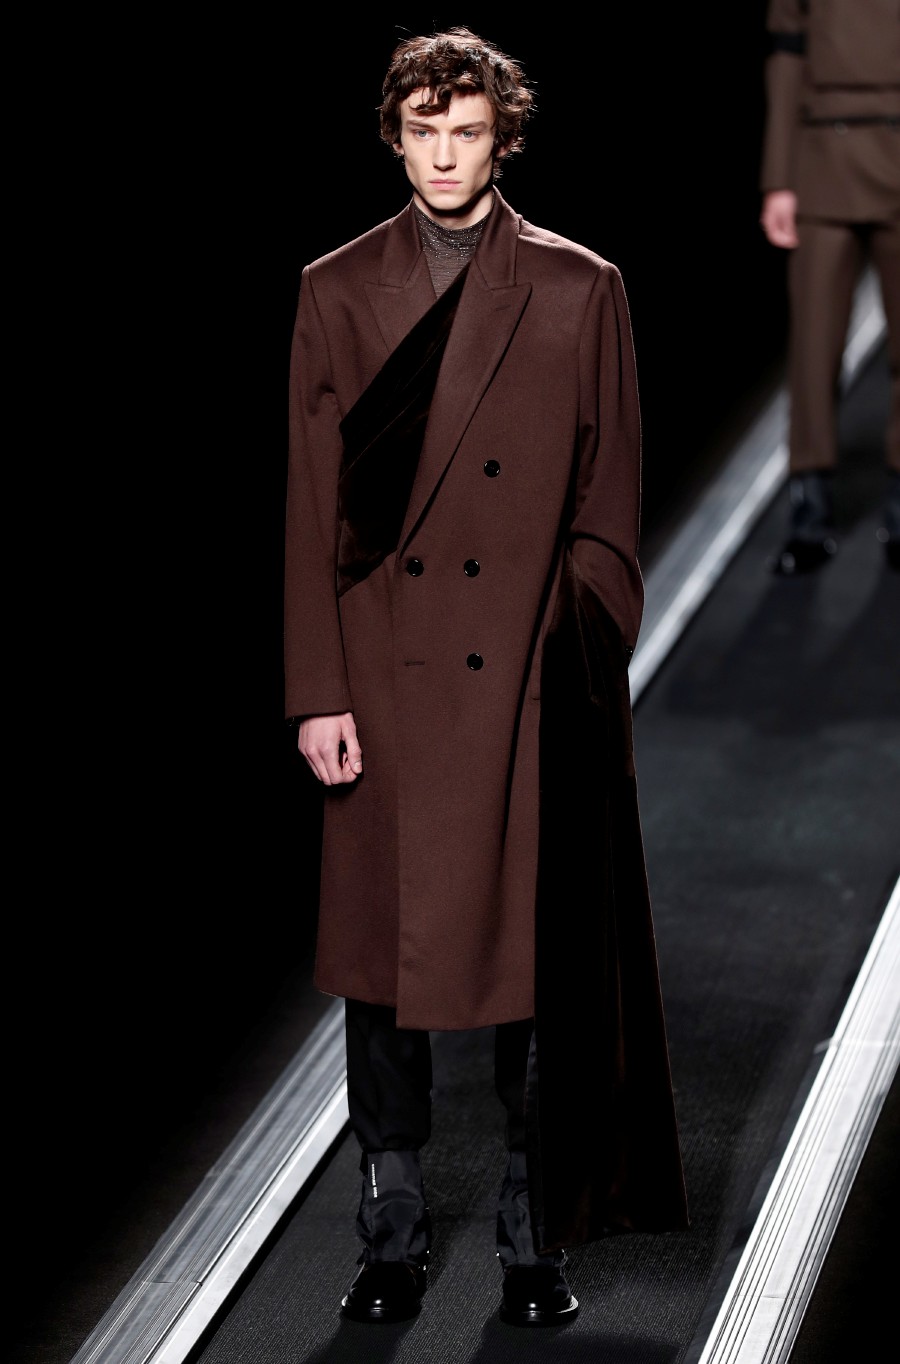 Dior declares men's fashion future to be suited and booted | New ...